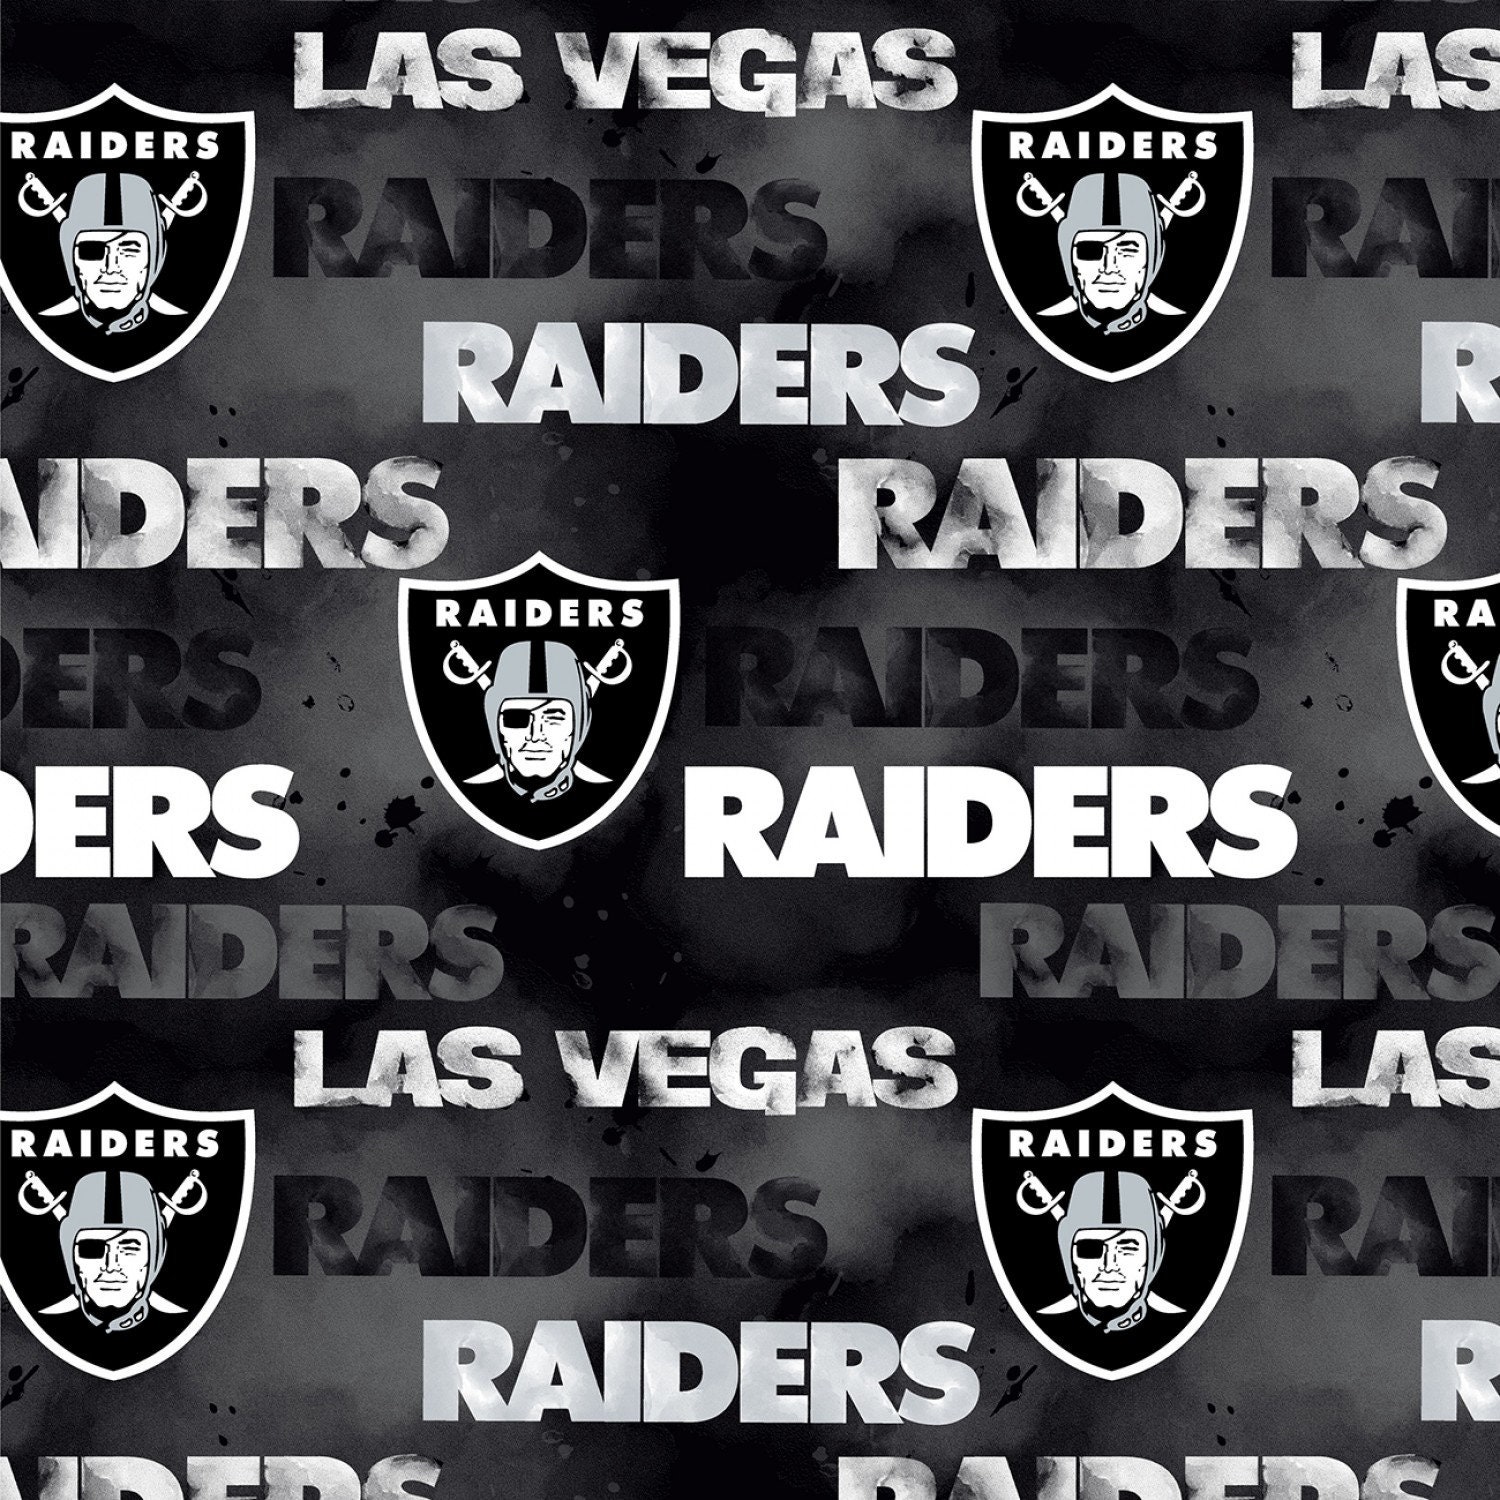 NFL LAS VEGAS RAIDERs New Black Print 100% cotton fabric material you  choose length licensed Crafts, Quilts, Home Decor